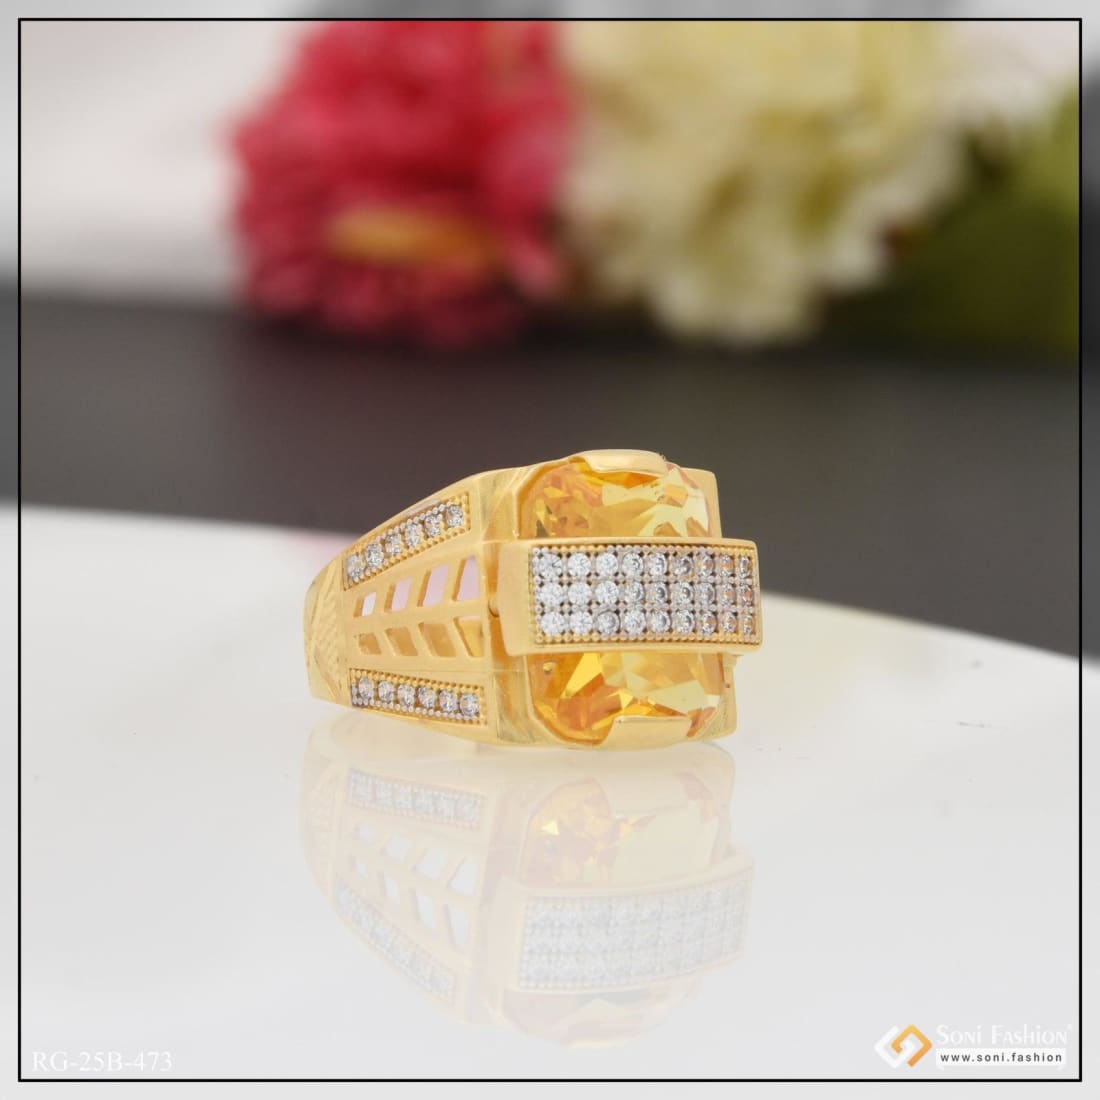 Trending Wholesale 1 gram gold ring designs At An Affordable Price -  Alibaba.com